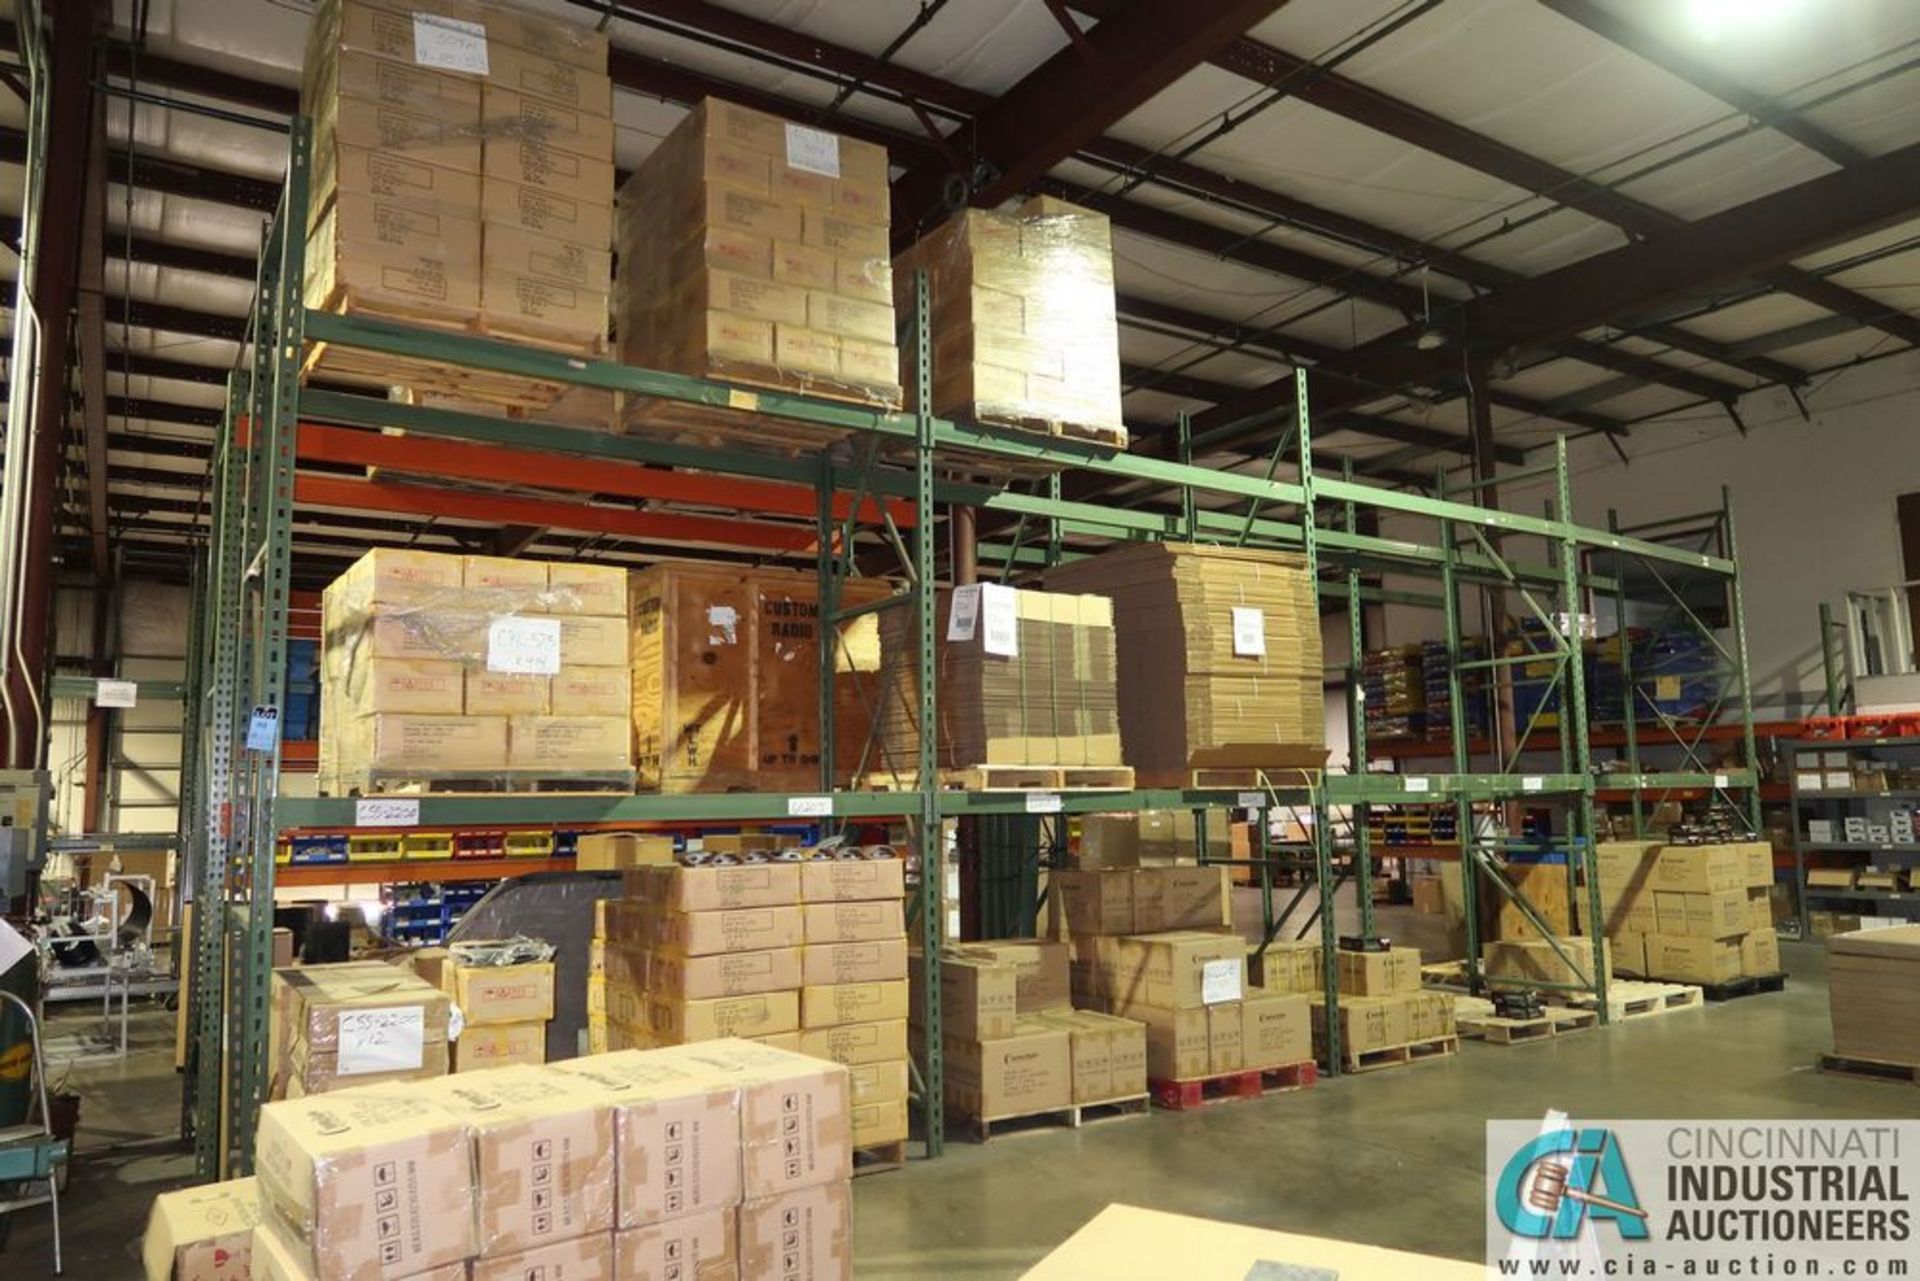 SECTIONS 108" X 42" X 168" ADJUSTABLE BEAM PALLET RACKS INCLUDING (16) 108" X 4" CROSSBEAMS AND (